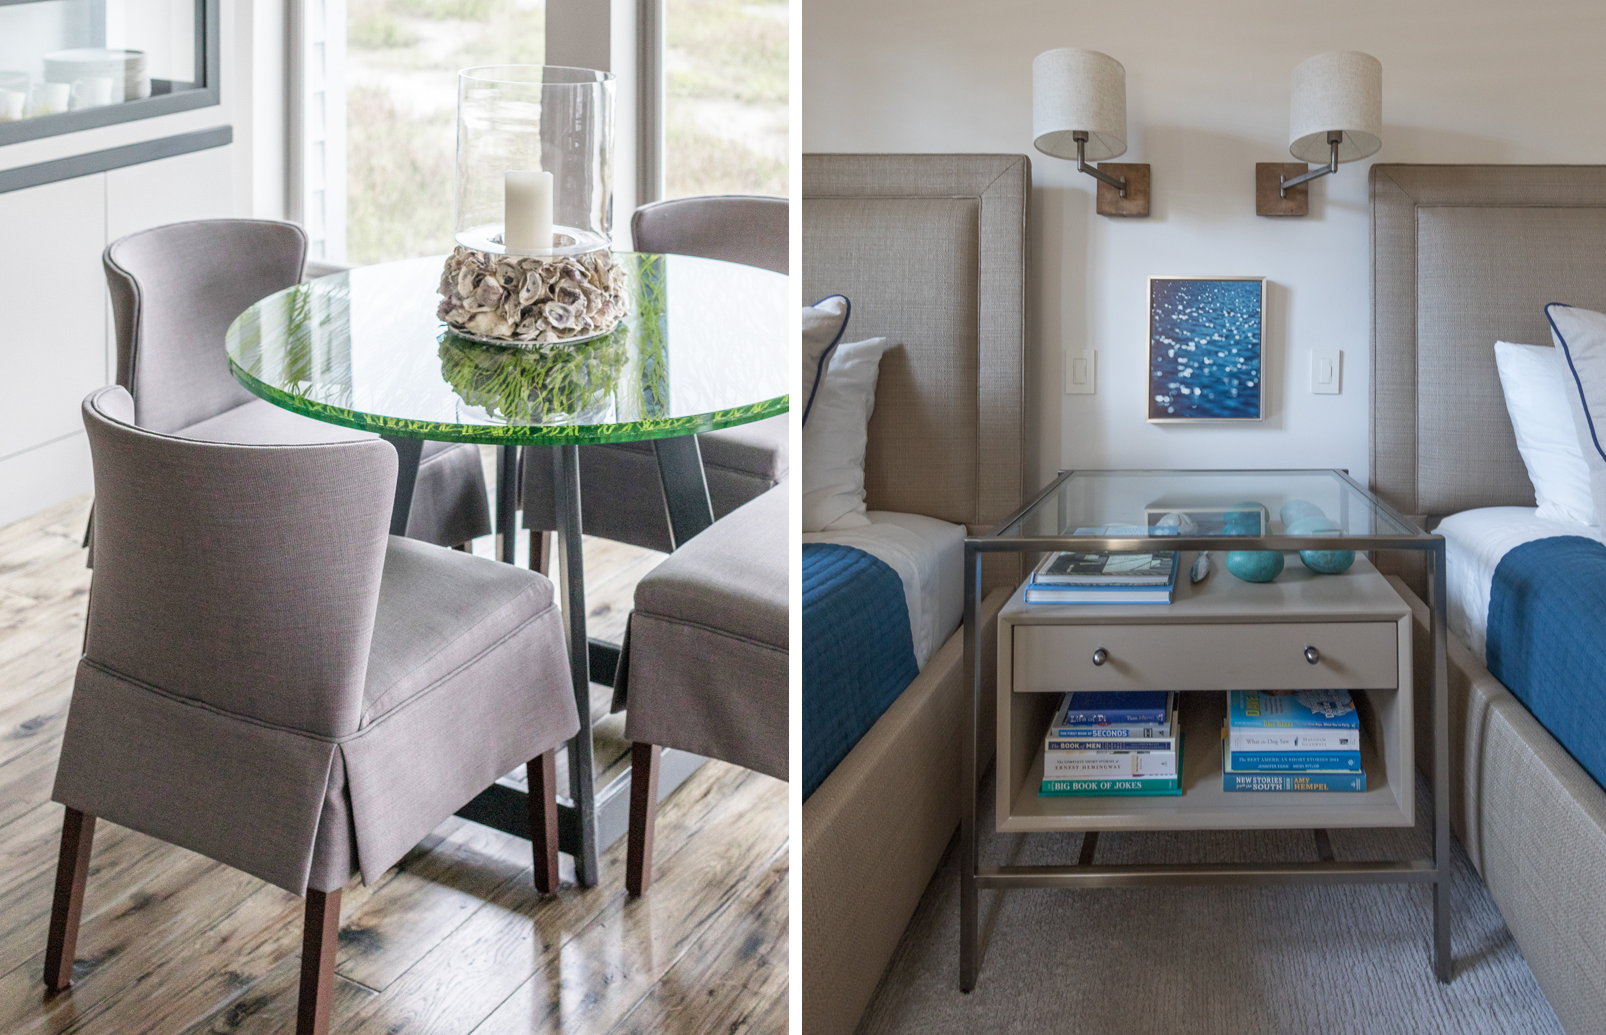 Modern dining table and chairs with natural elements that reflect the Hilton Head Island surroundings. Contemporary double beds with shared bedside table and pops of blue